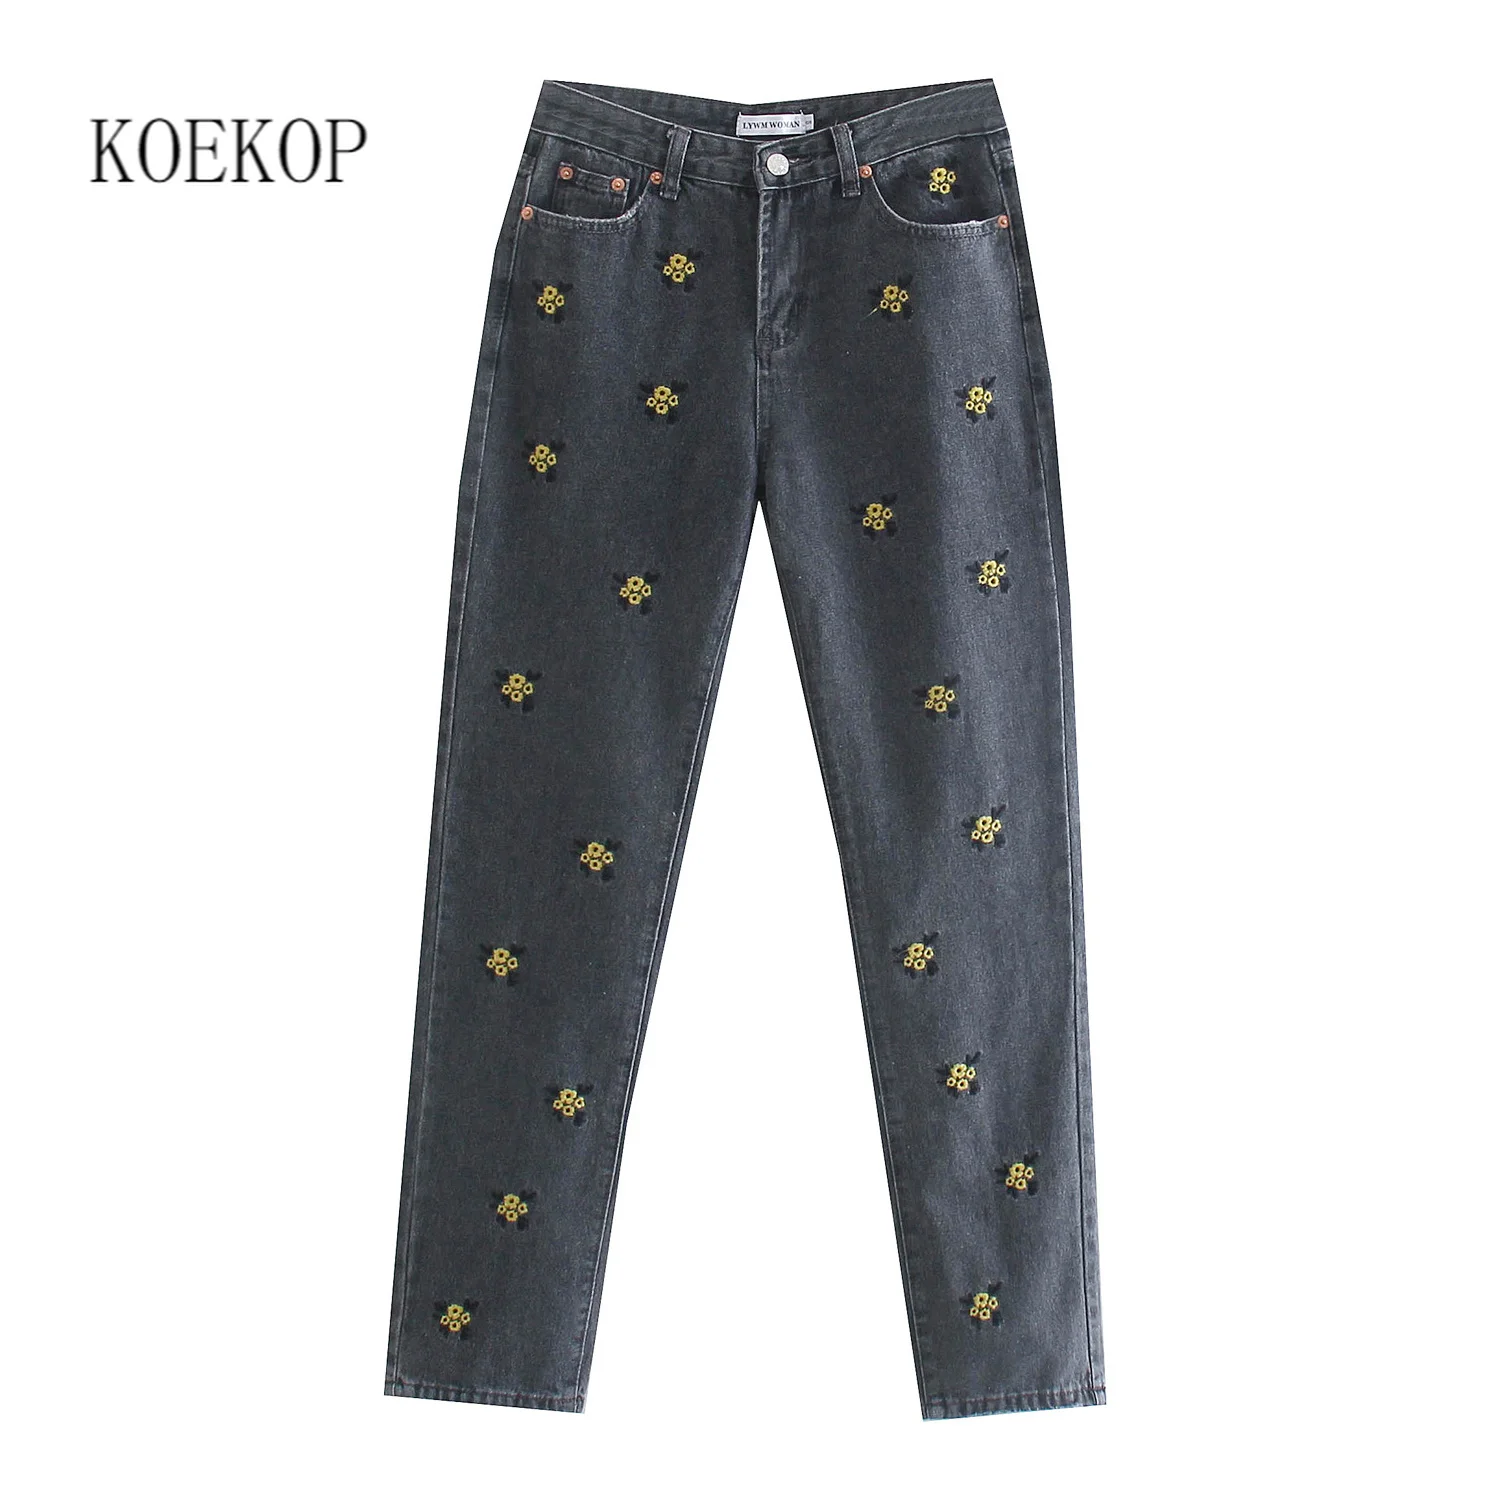 

Koekop Women Fashion Full Length Denim Jeans High Waist Faded Effect Embroidered Flower Detail Casual Slim Fit Pants Woman